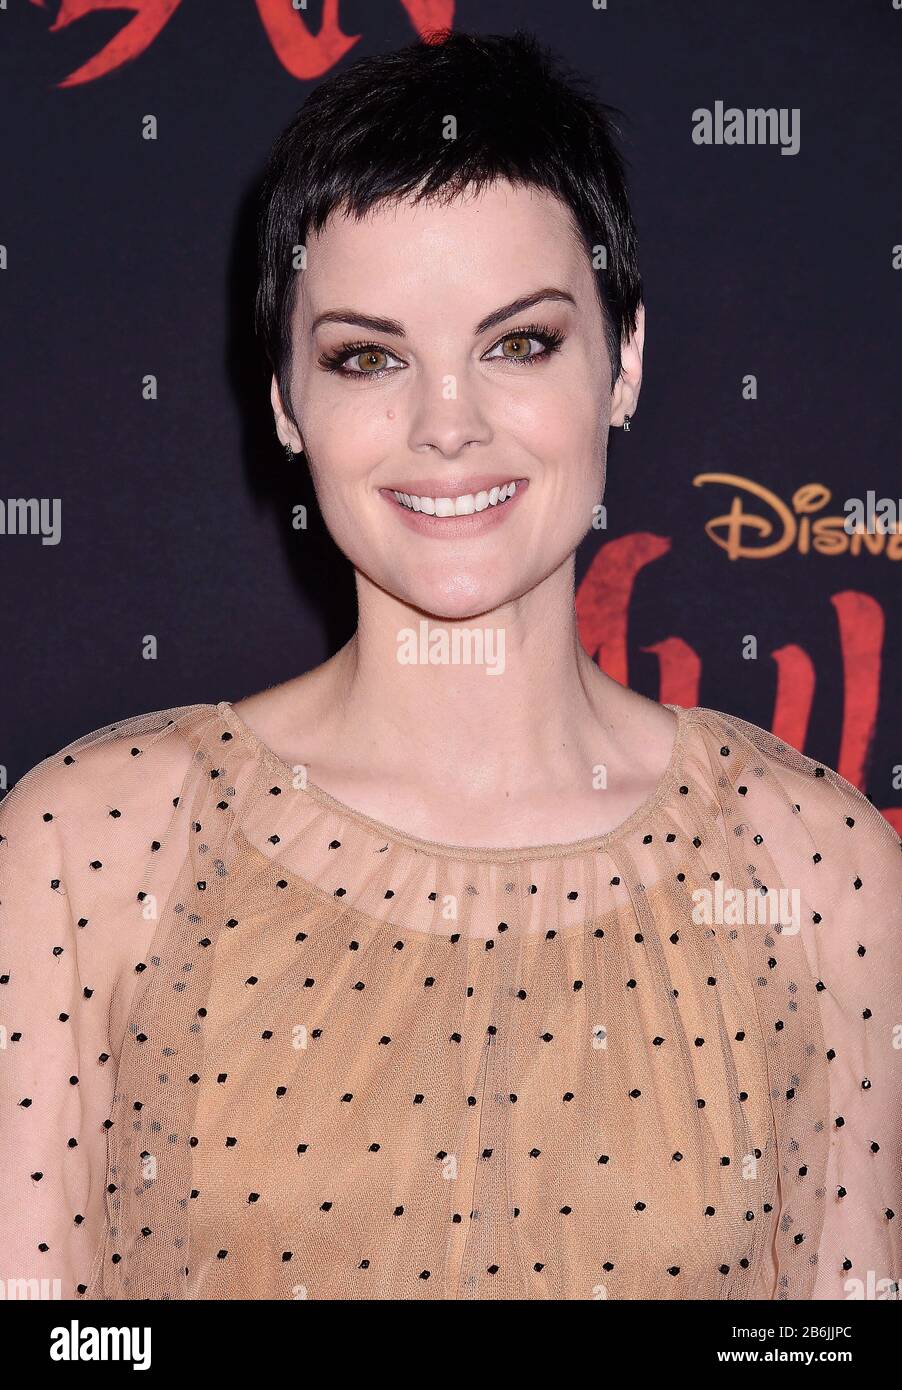 HOLLYWOOD, CA - MARCH 09: Jaimie Alexander attends the premiere of Disney's 'Mulan' at the El Capitan Theatre on March 09, 2020 in Hollywood, California. Stock Photo